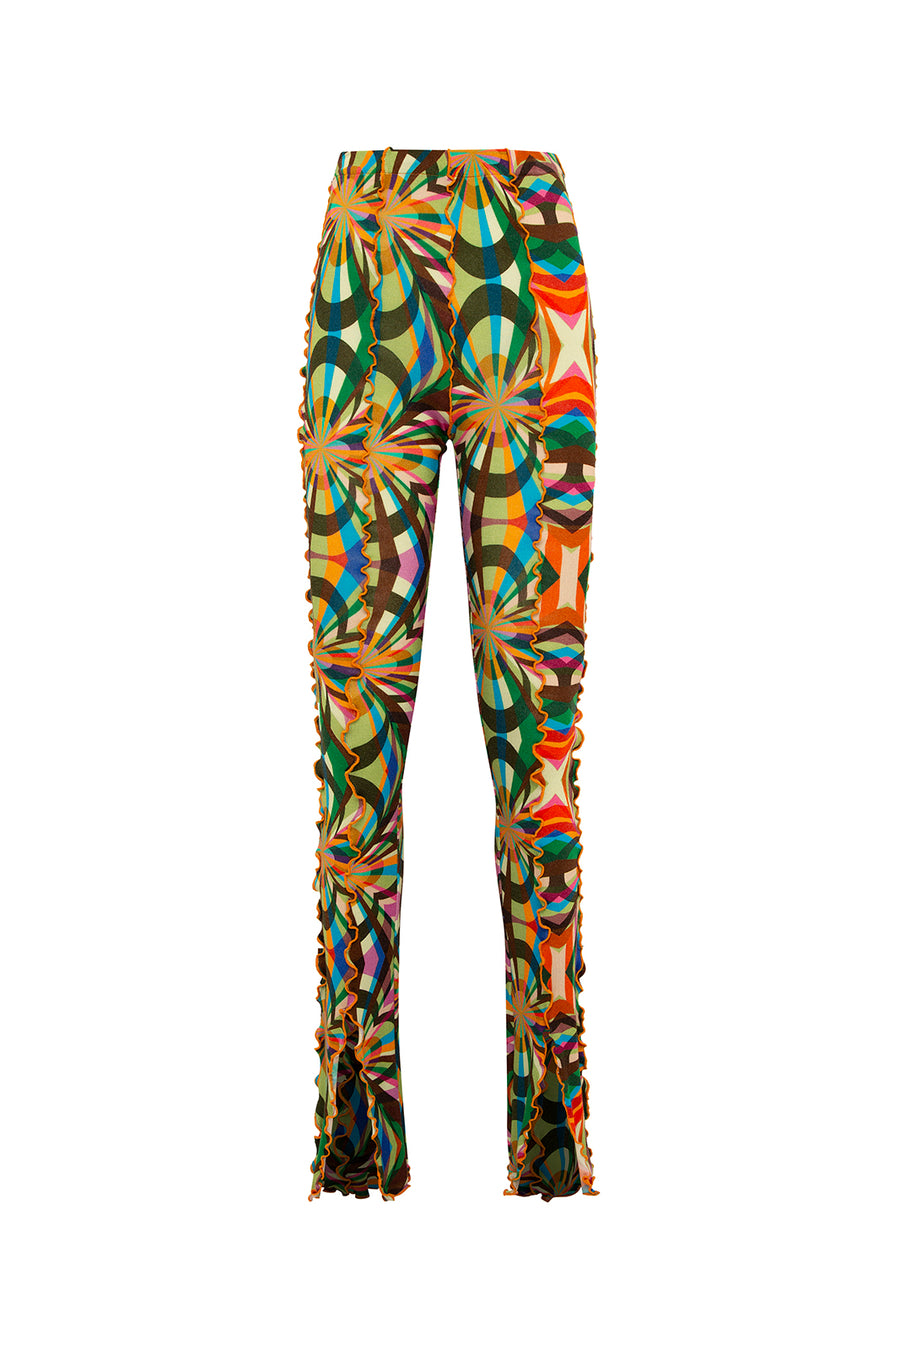 MULT - Kaleidoscope knit pants with contrast stitches